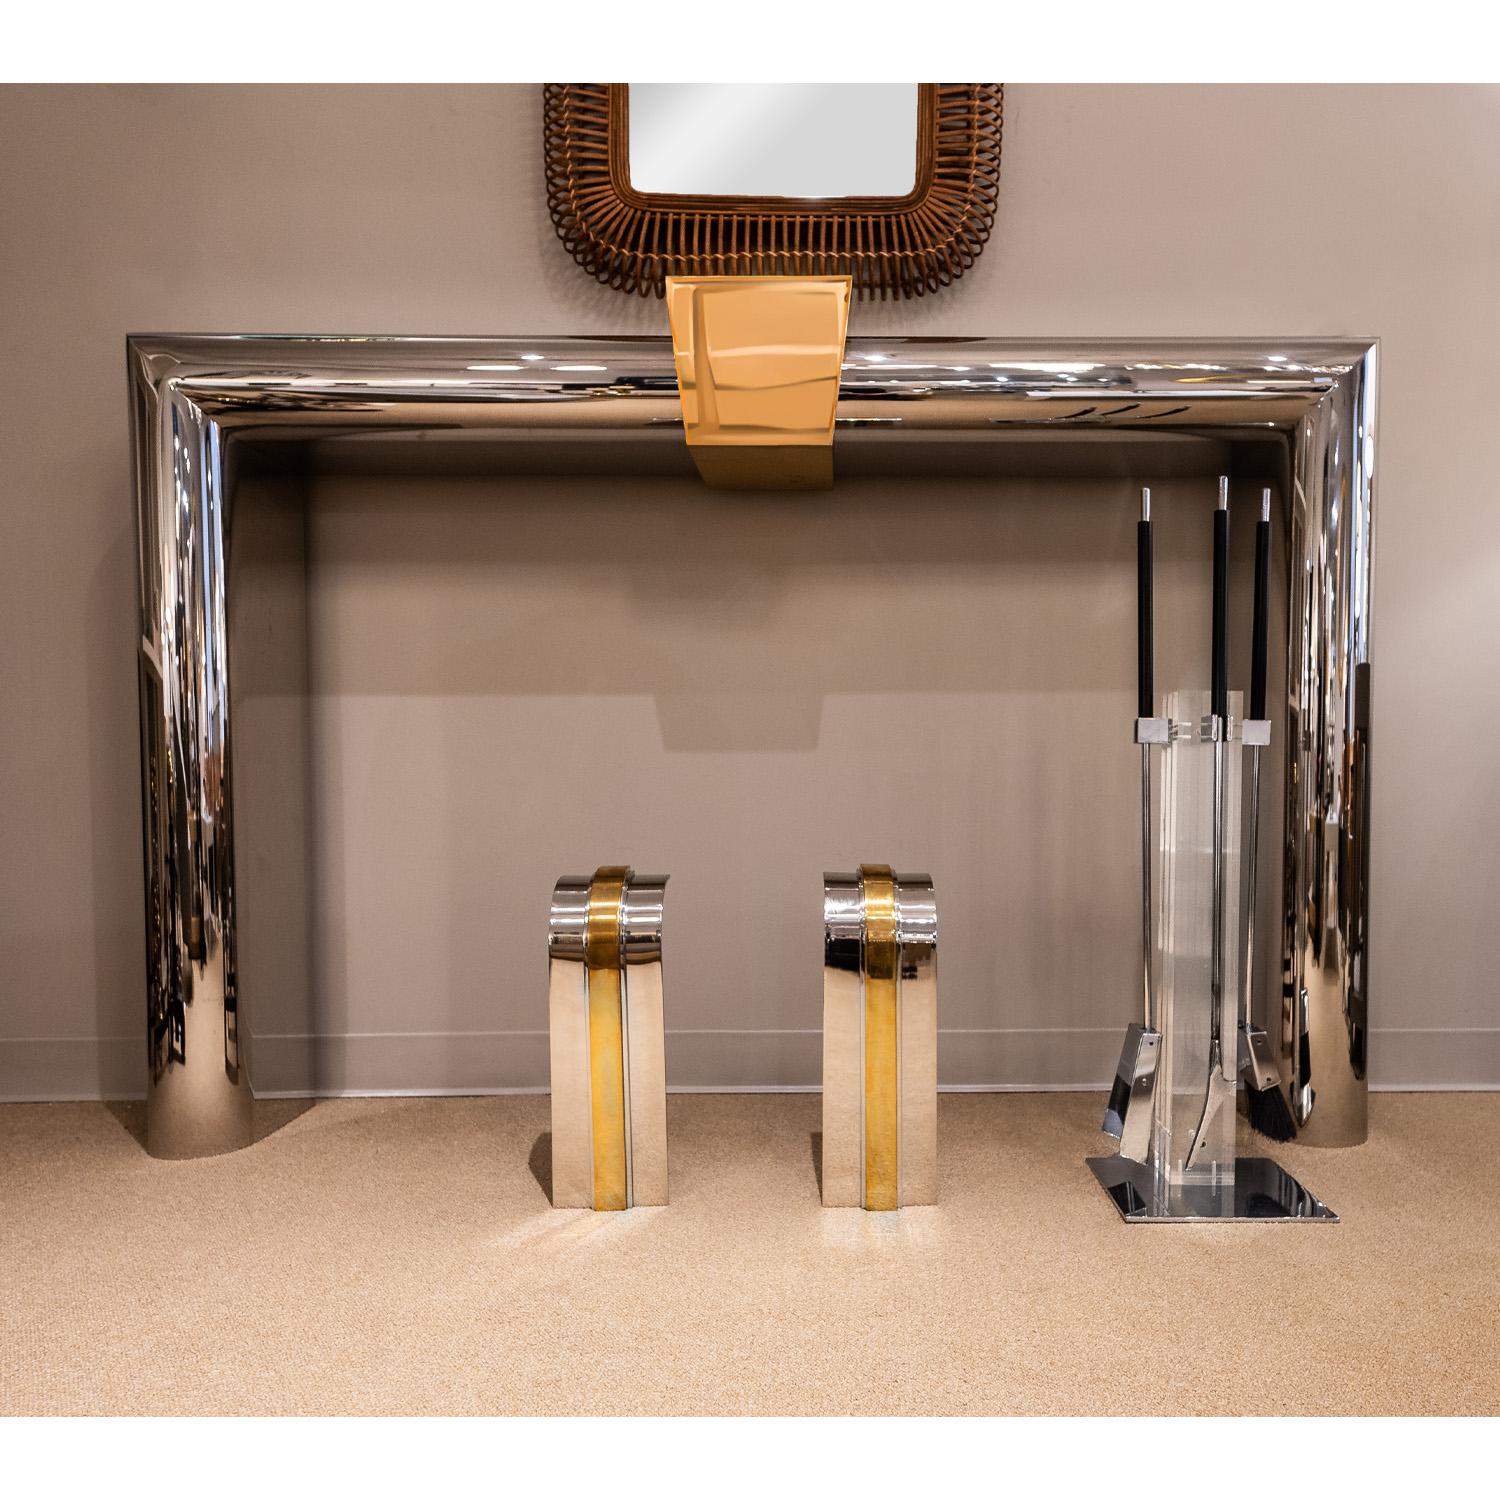 Late 20th Century Stunning Danny Alessandro Fireplace Surround in Stainless Steel and Brass 1980s